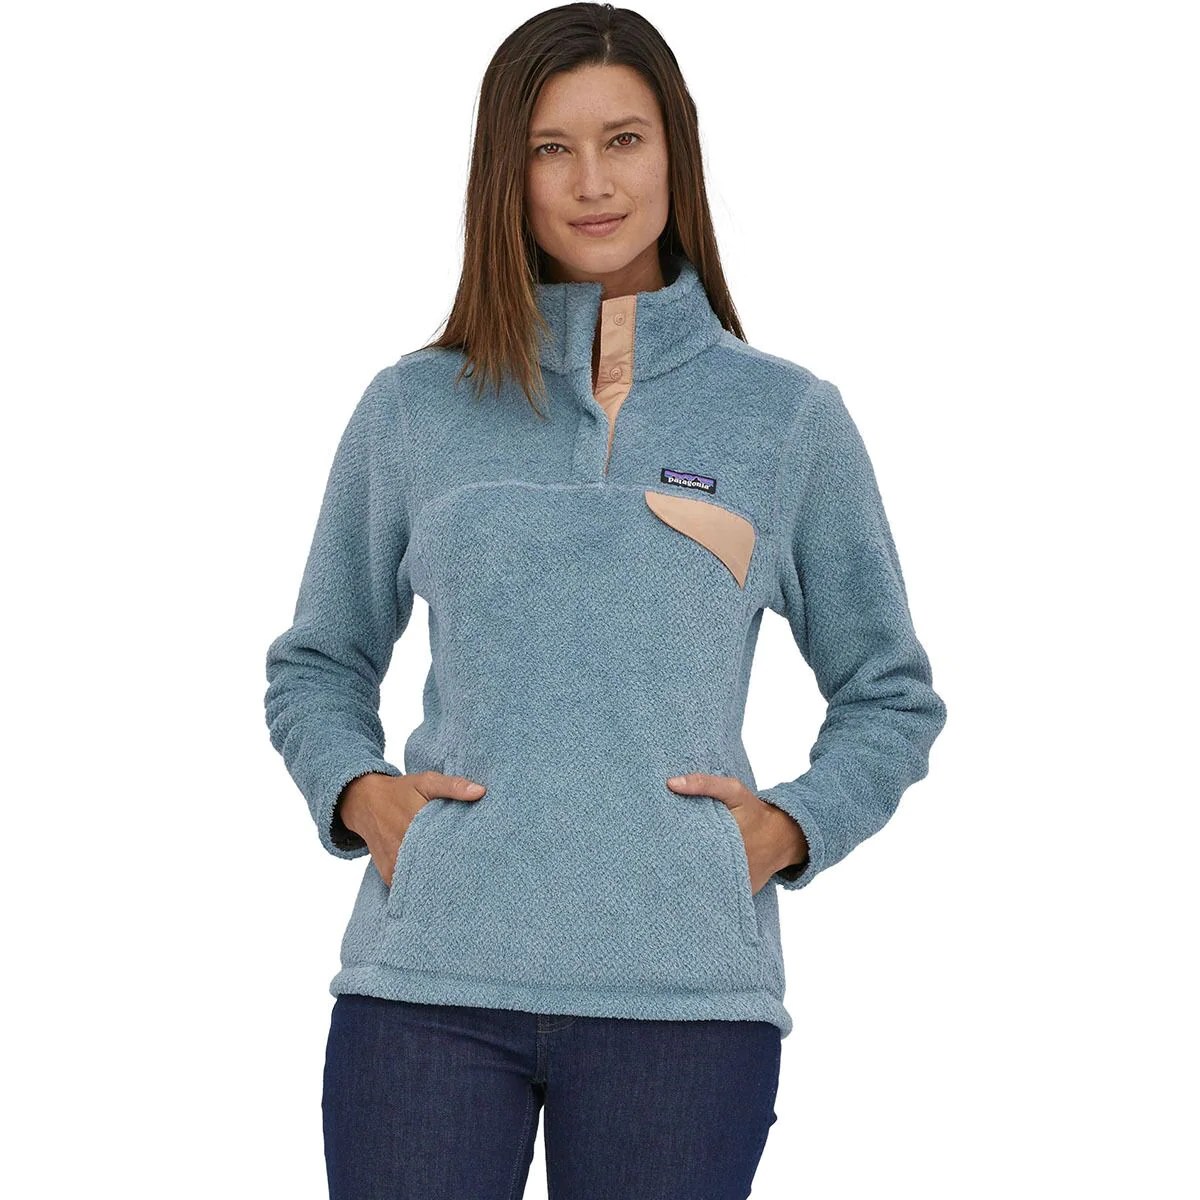 model wearing patagonia retool pull over fleece in blue which is now on sale at backcountry